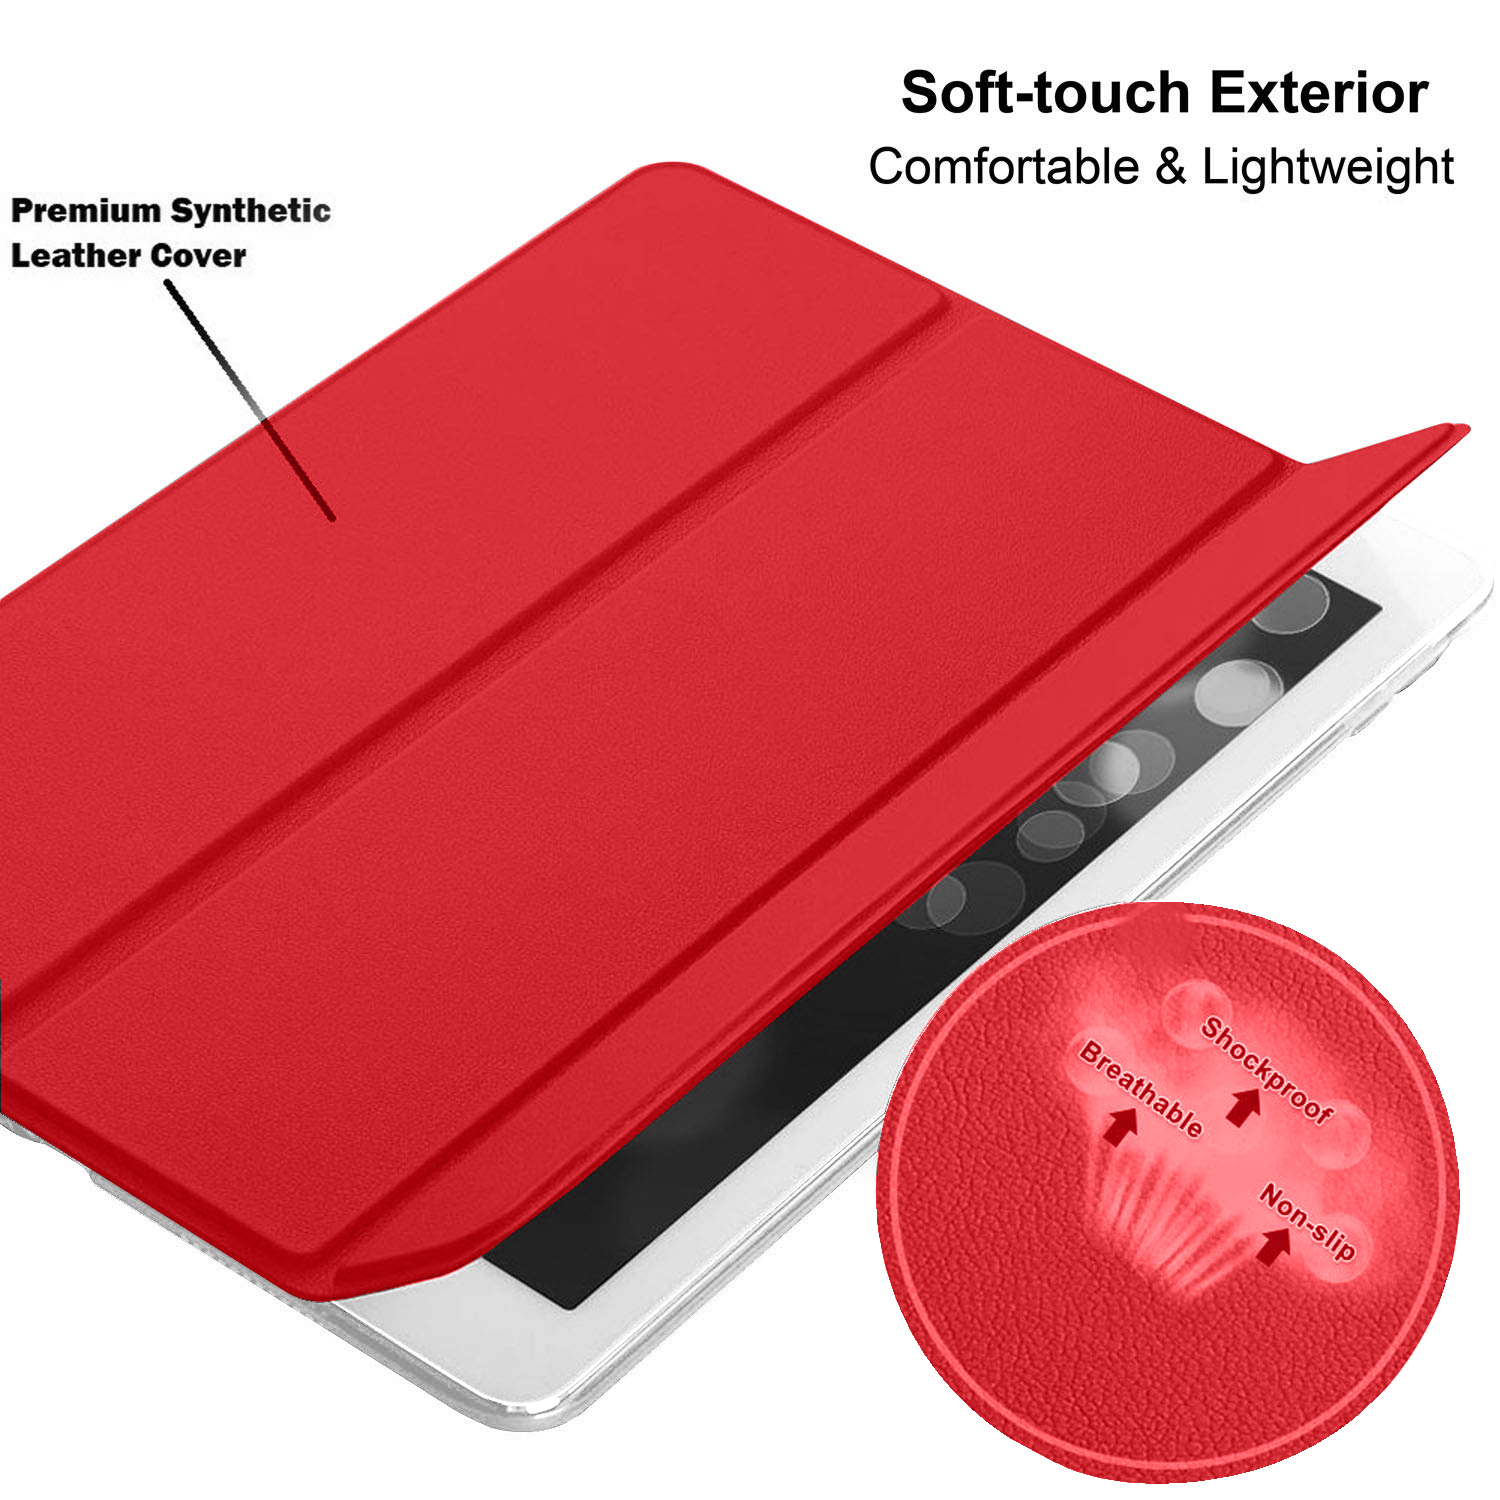 DuraSafe Cases For iPad Mini 5 Generation 2019 - 7.9 Inch Slimline Series Lightweight Protective Cover with Dual Angle Stand & Froasted PC Back Shell - Red - image 4 of 6